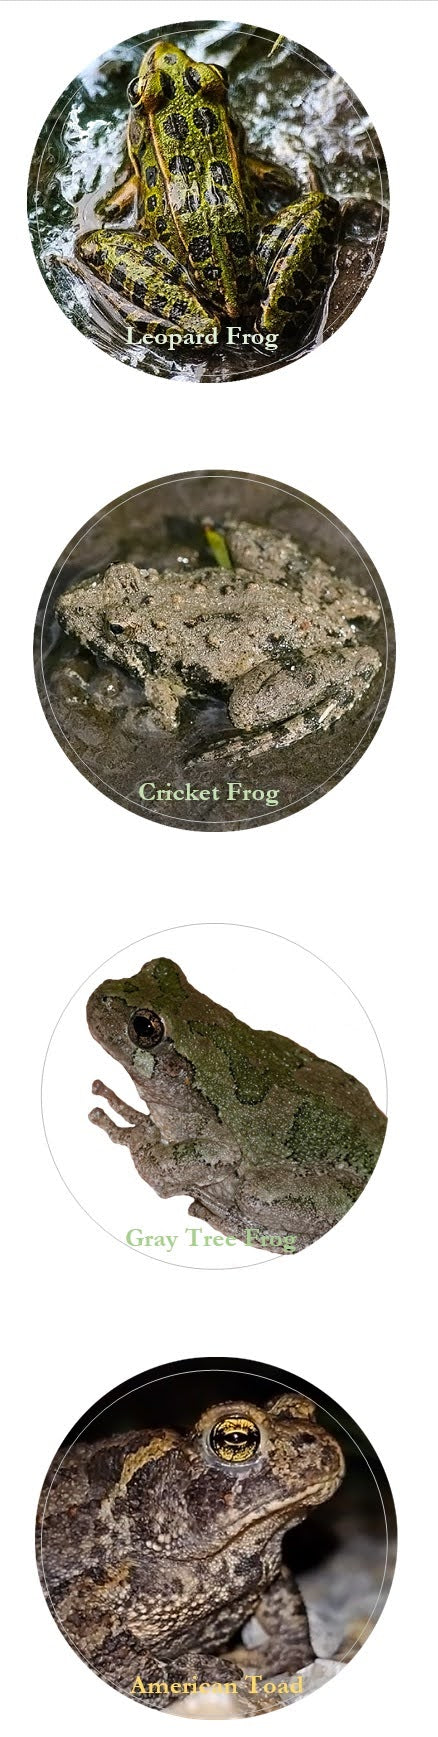 Stickers: Midwest Frogs and Toad